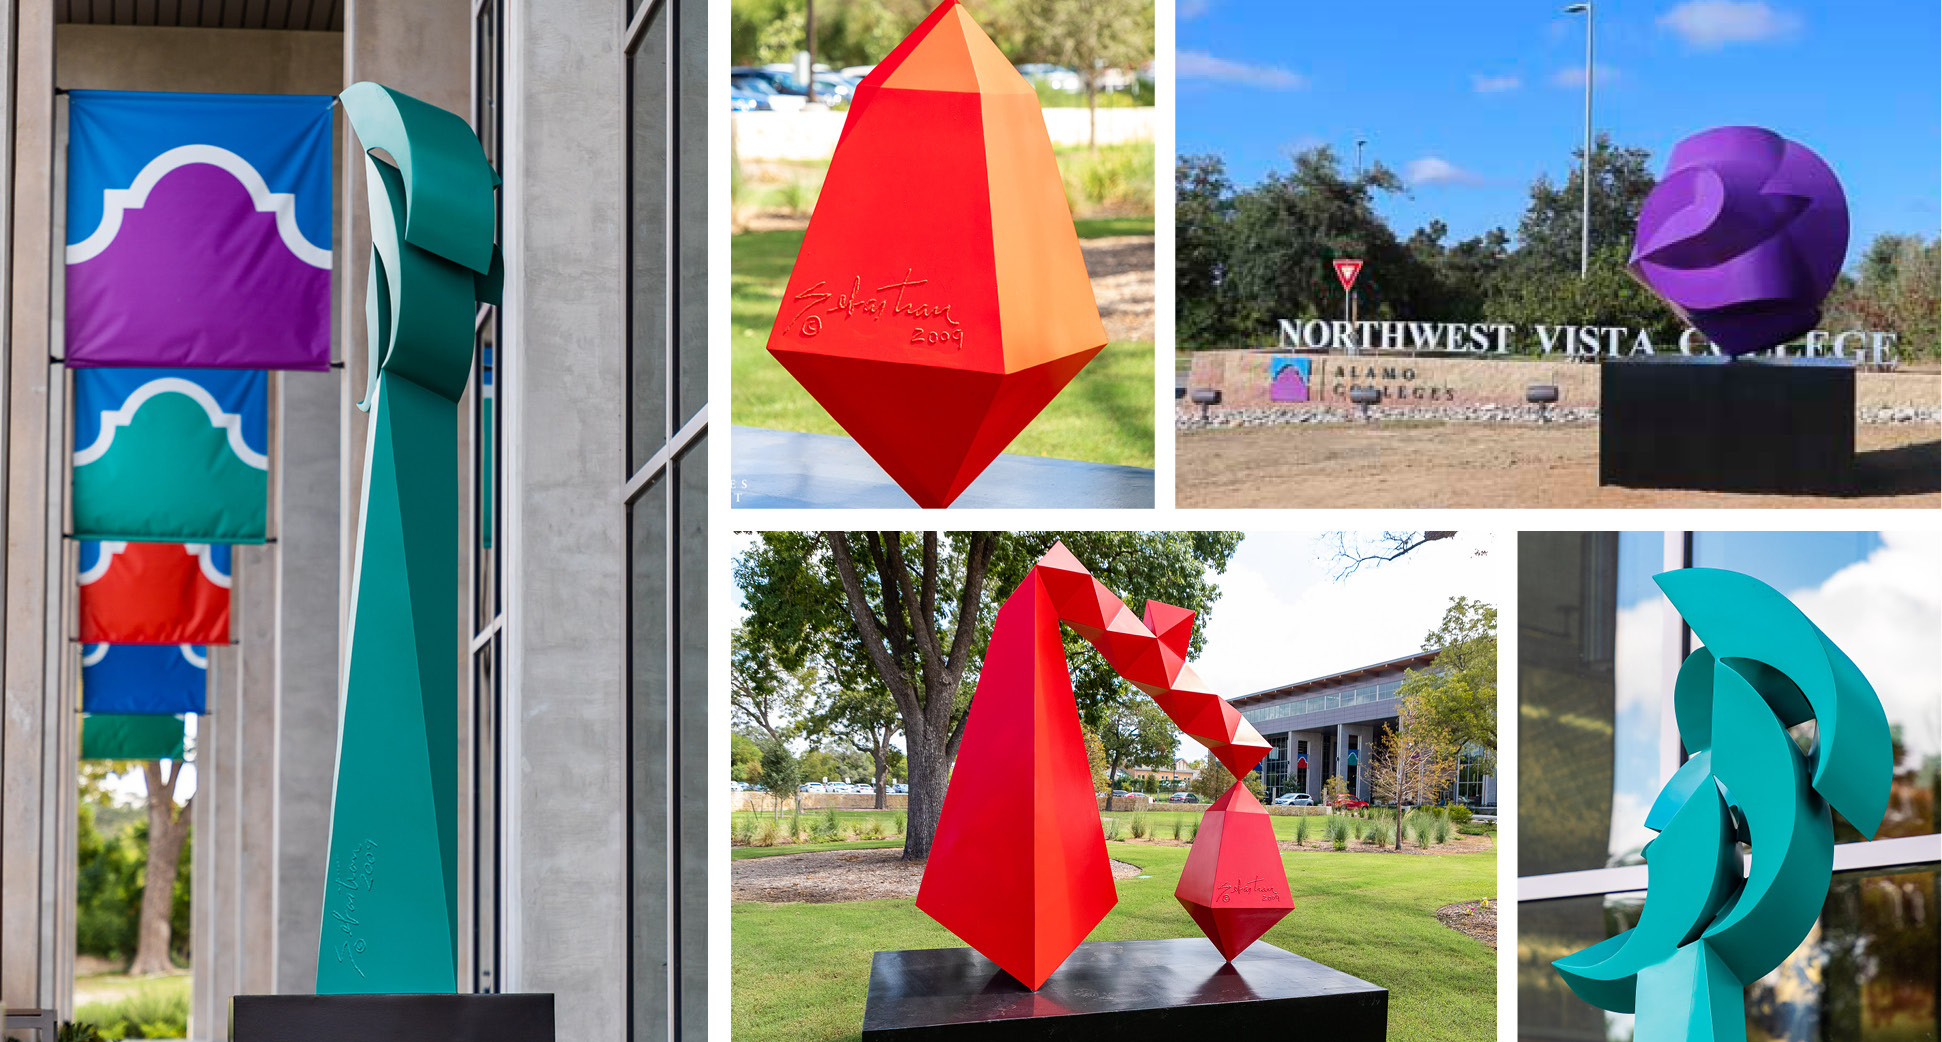 Art Installations Across Colleges